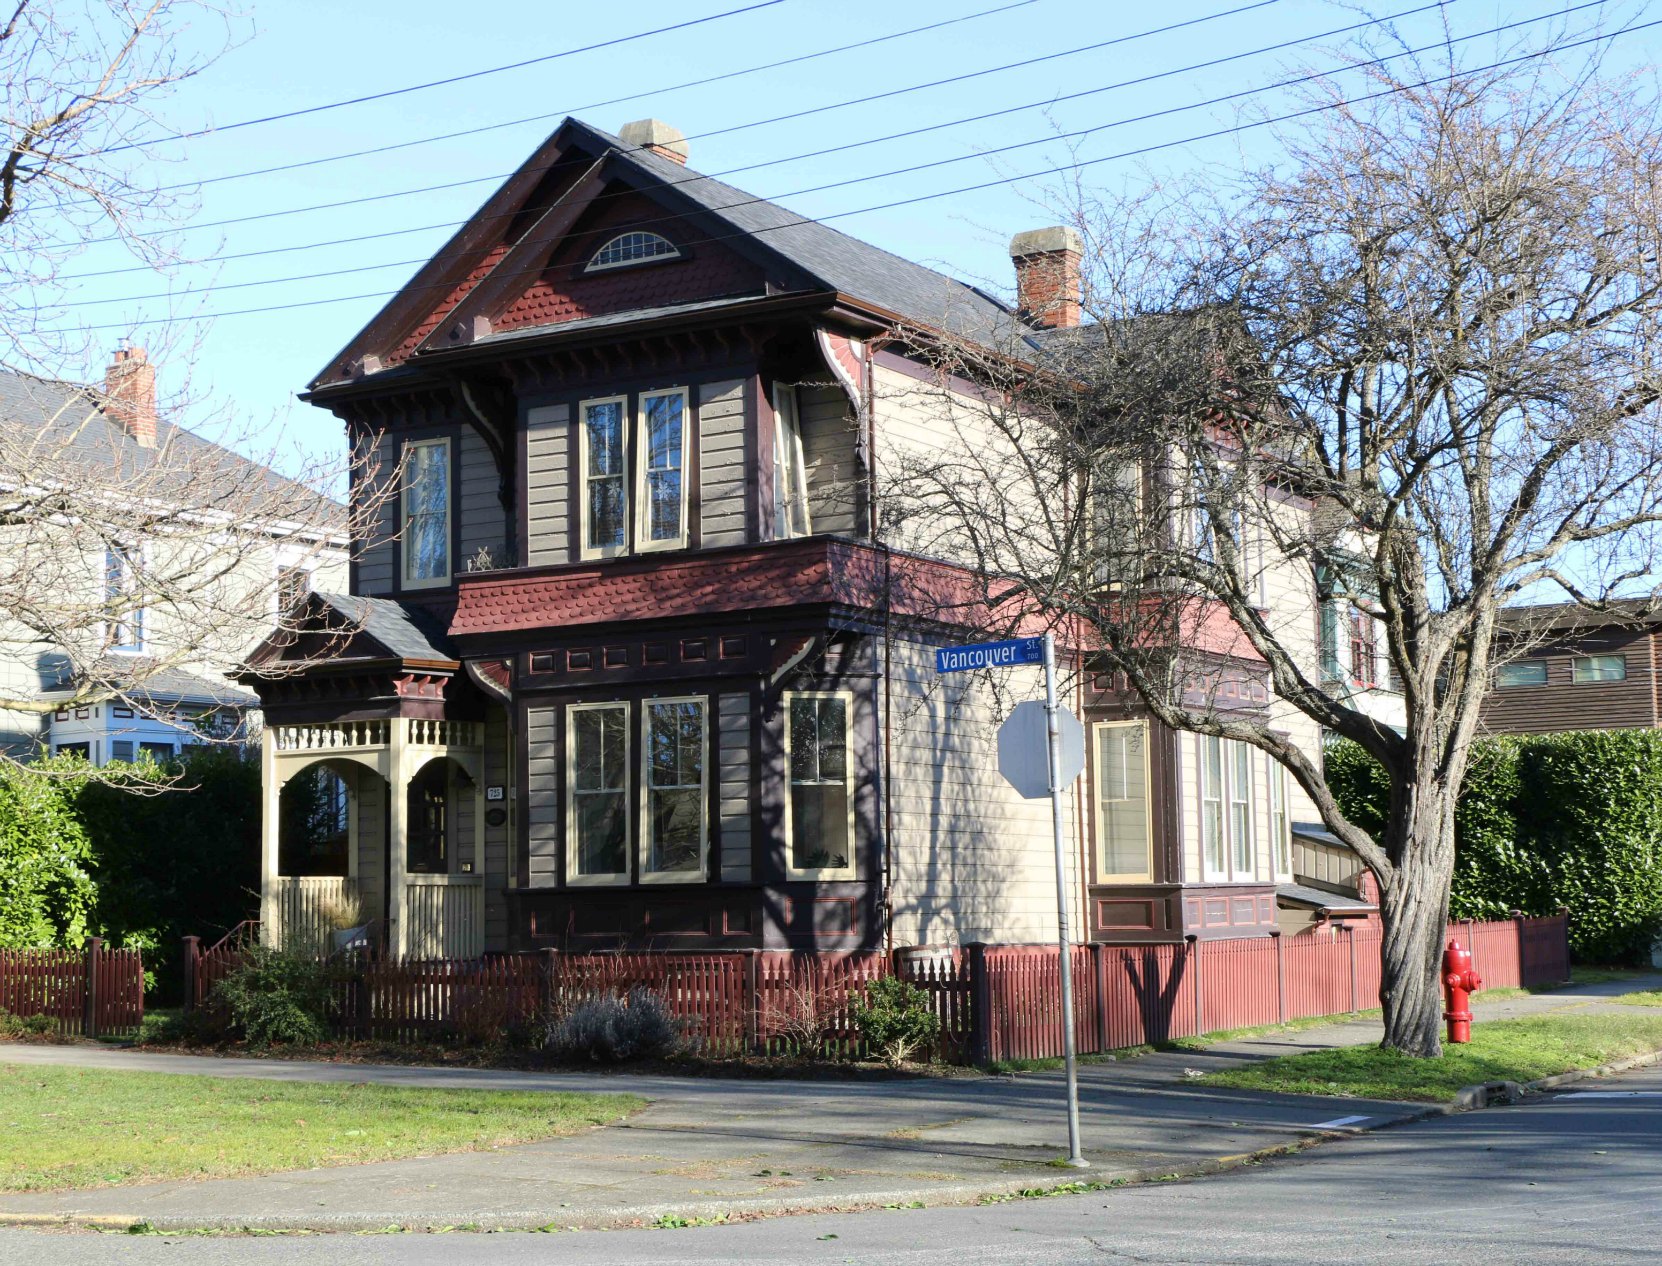 725 Vancouver Street, designed and built in 1892 by architect John Teague (photo by Victoria Online Sightseeing Tours)